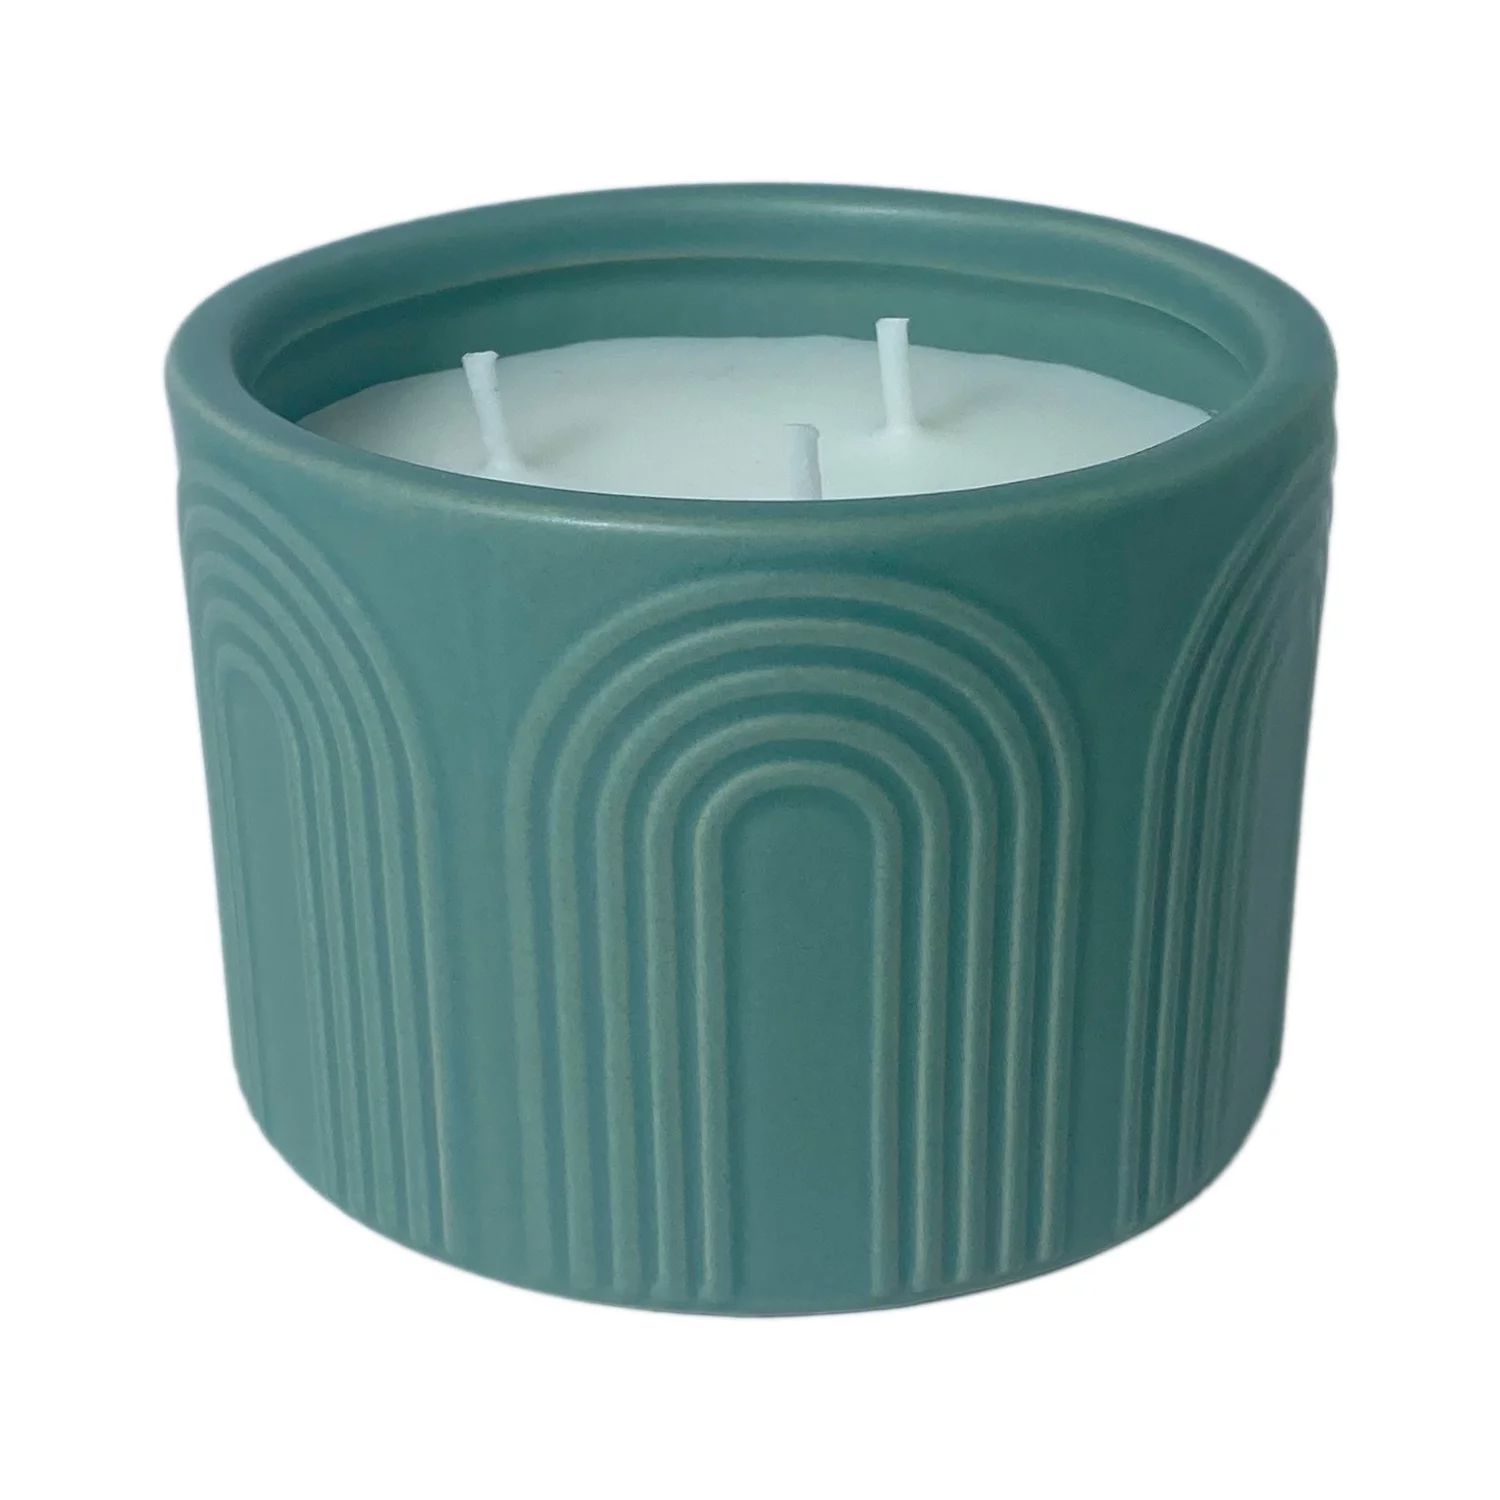 Better Homes & Gardens Citronella, Mint Leaf, and Eucalyptus 12oz Scented Candle, Green | Walmart (US)